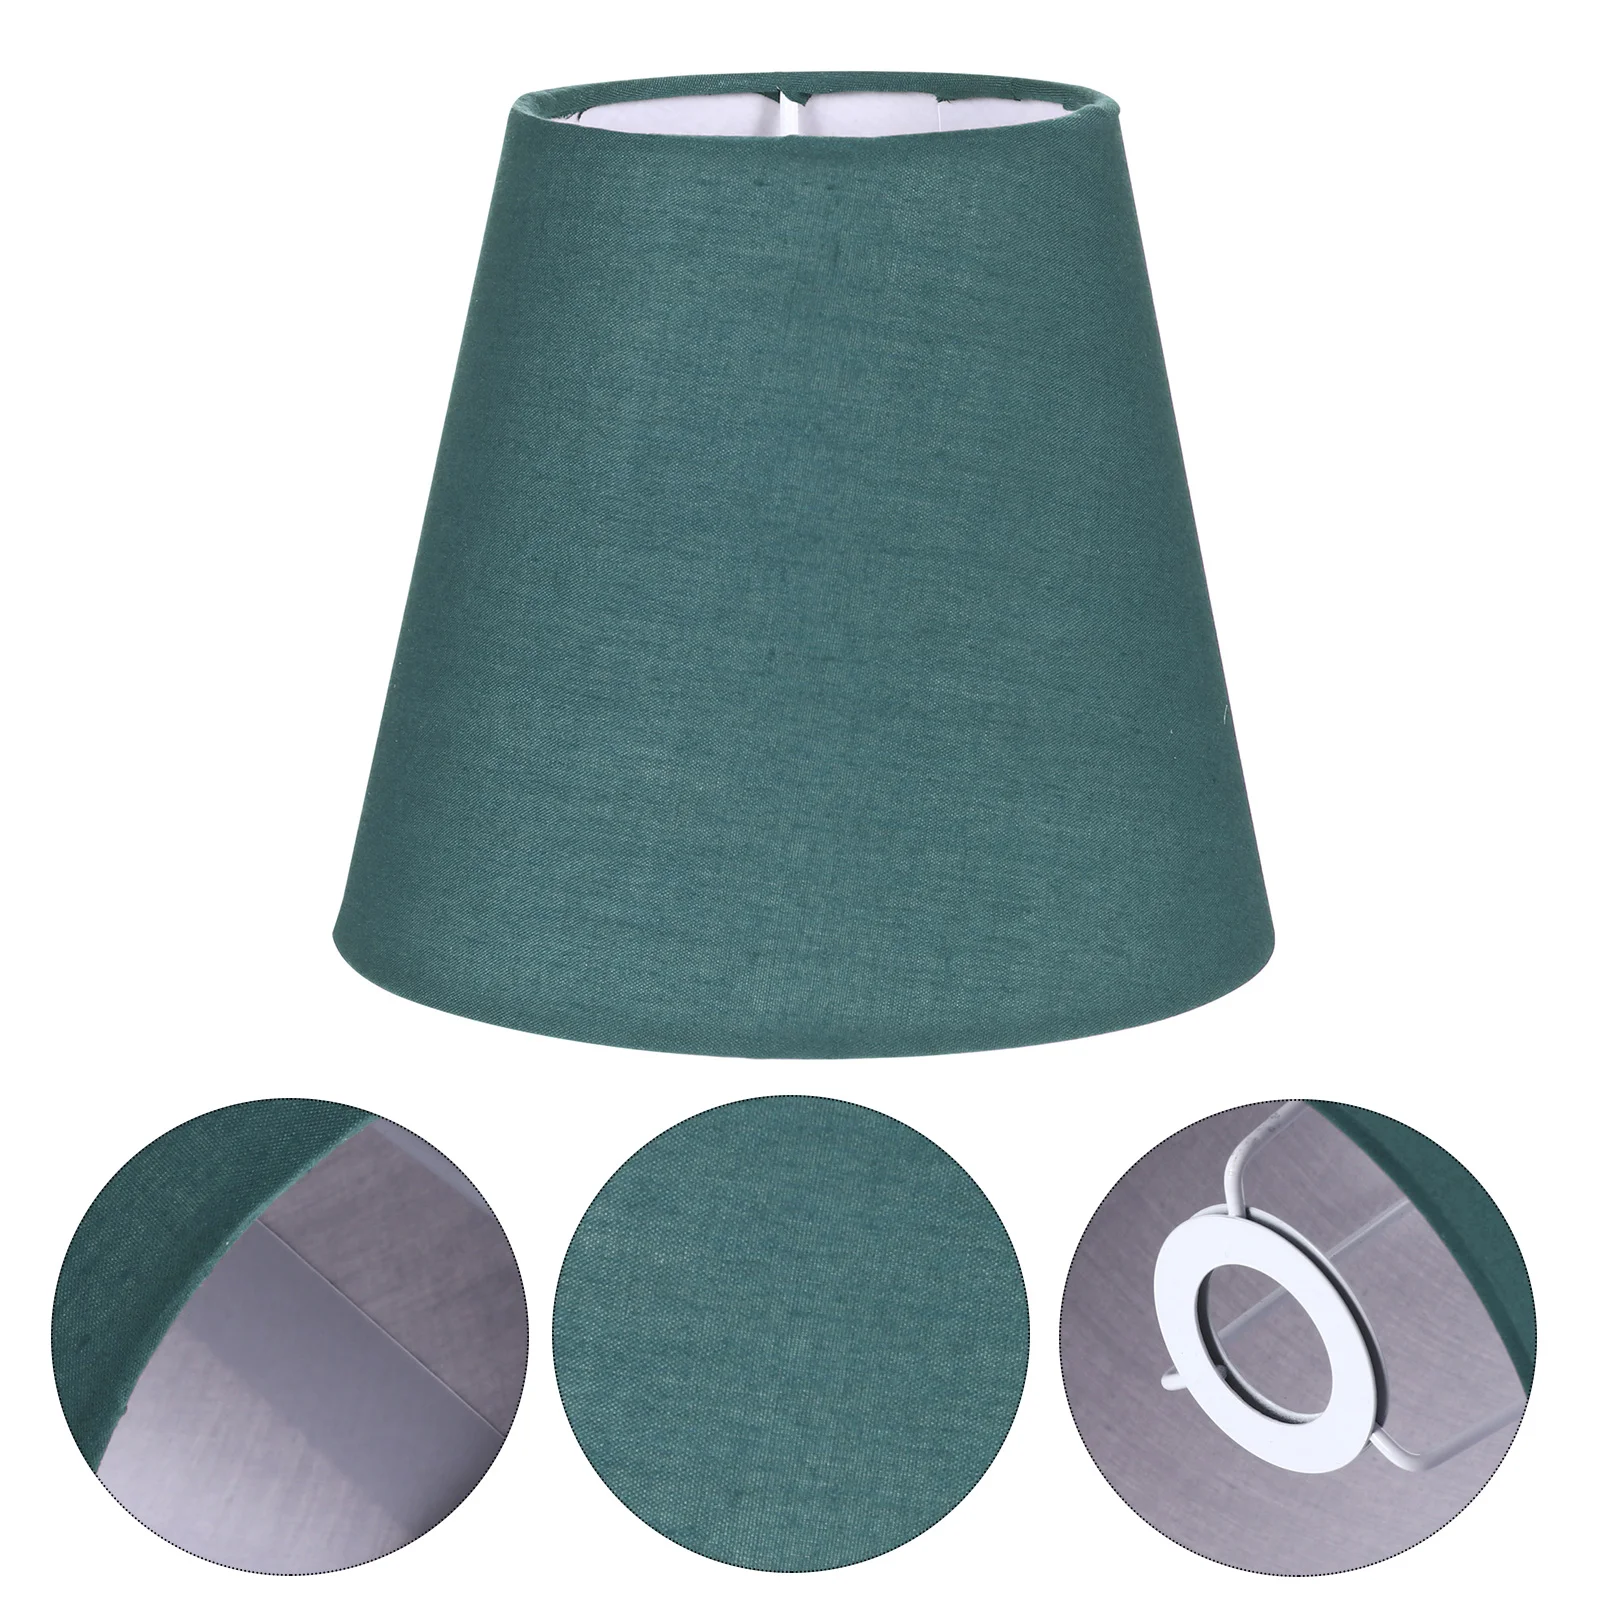 

Lamp Shade Cover Shades Light Tablelampshade Cloth Chandelier Floor Walllampshades Replacementdrum Lamps Bulb Sconceclip Ceiling